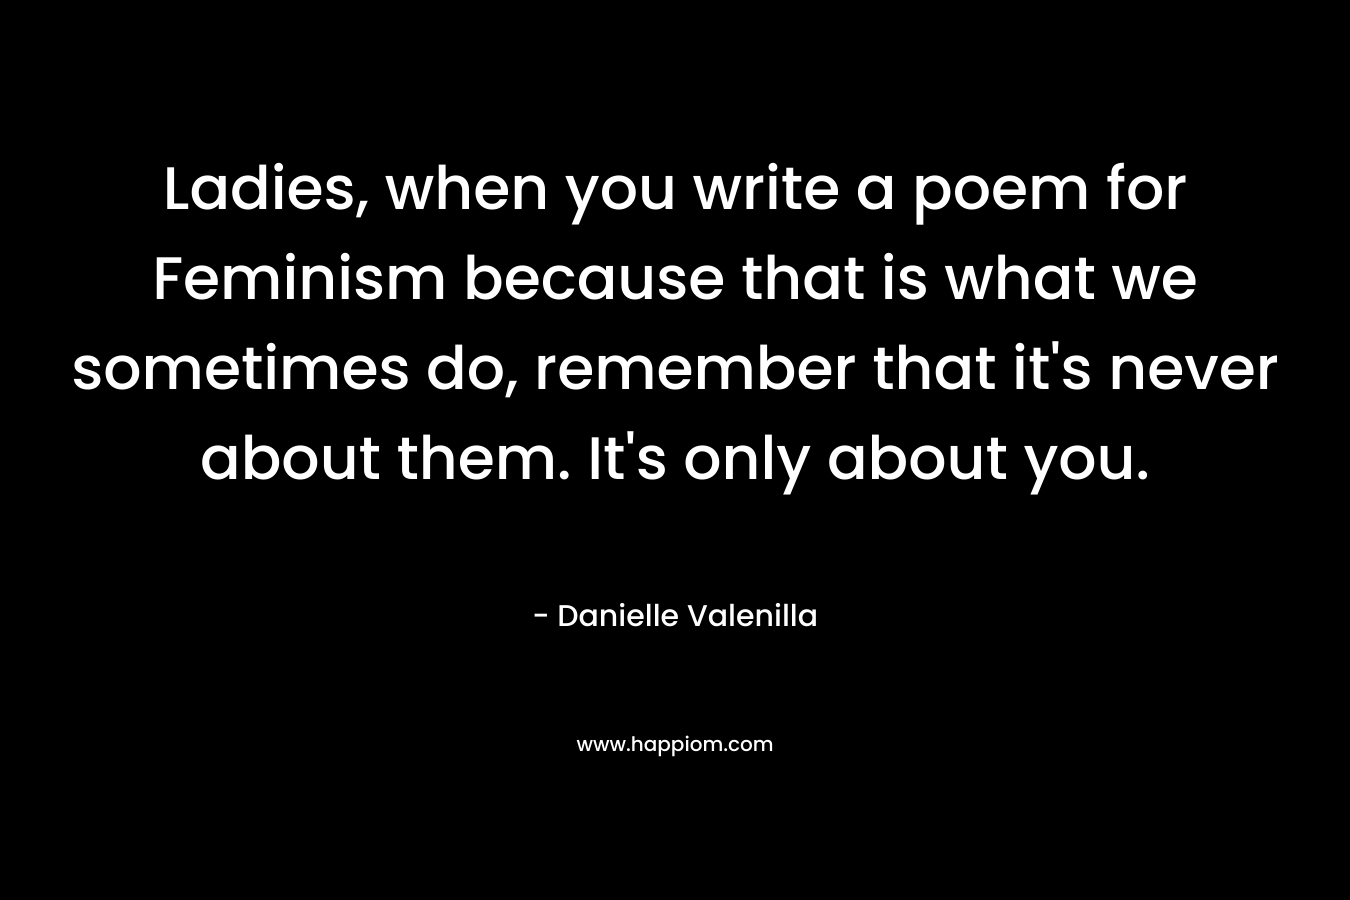 Ladies, when you write a poem for Feminism because that is what we sometimes do, remember that it’s never about them. It’s only about you. – Danielle Valenilla